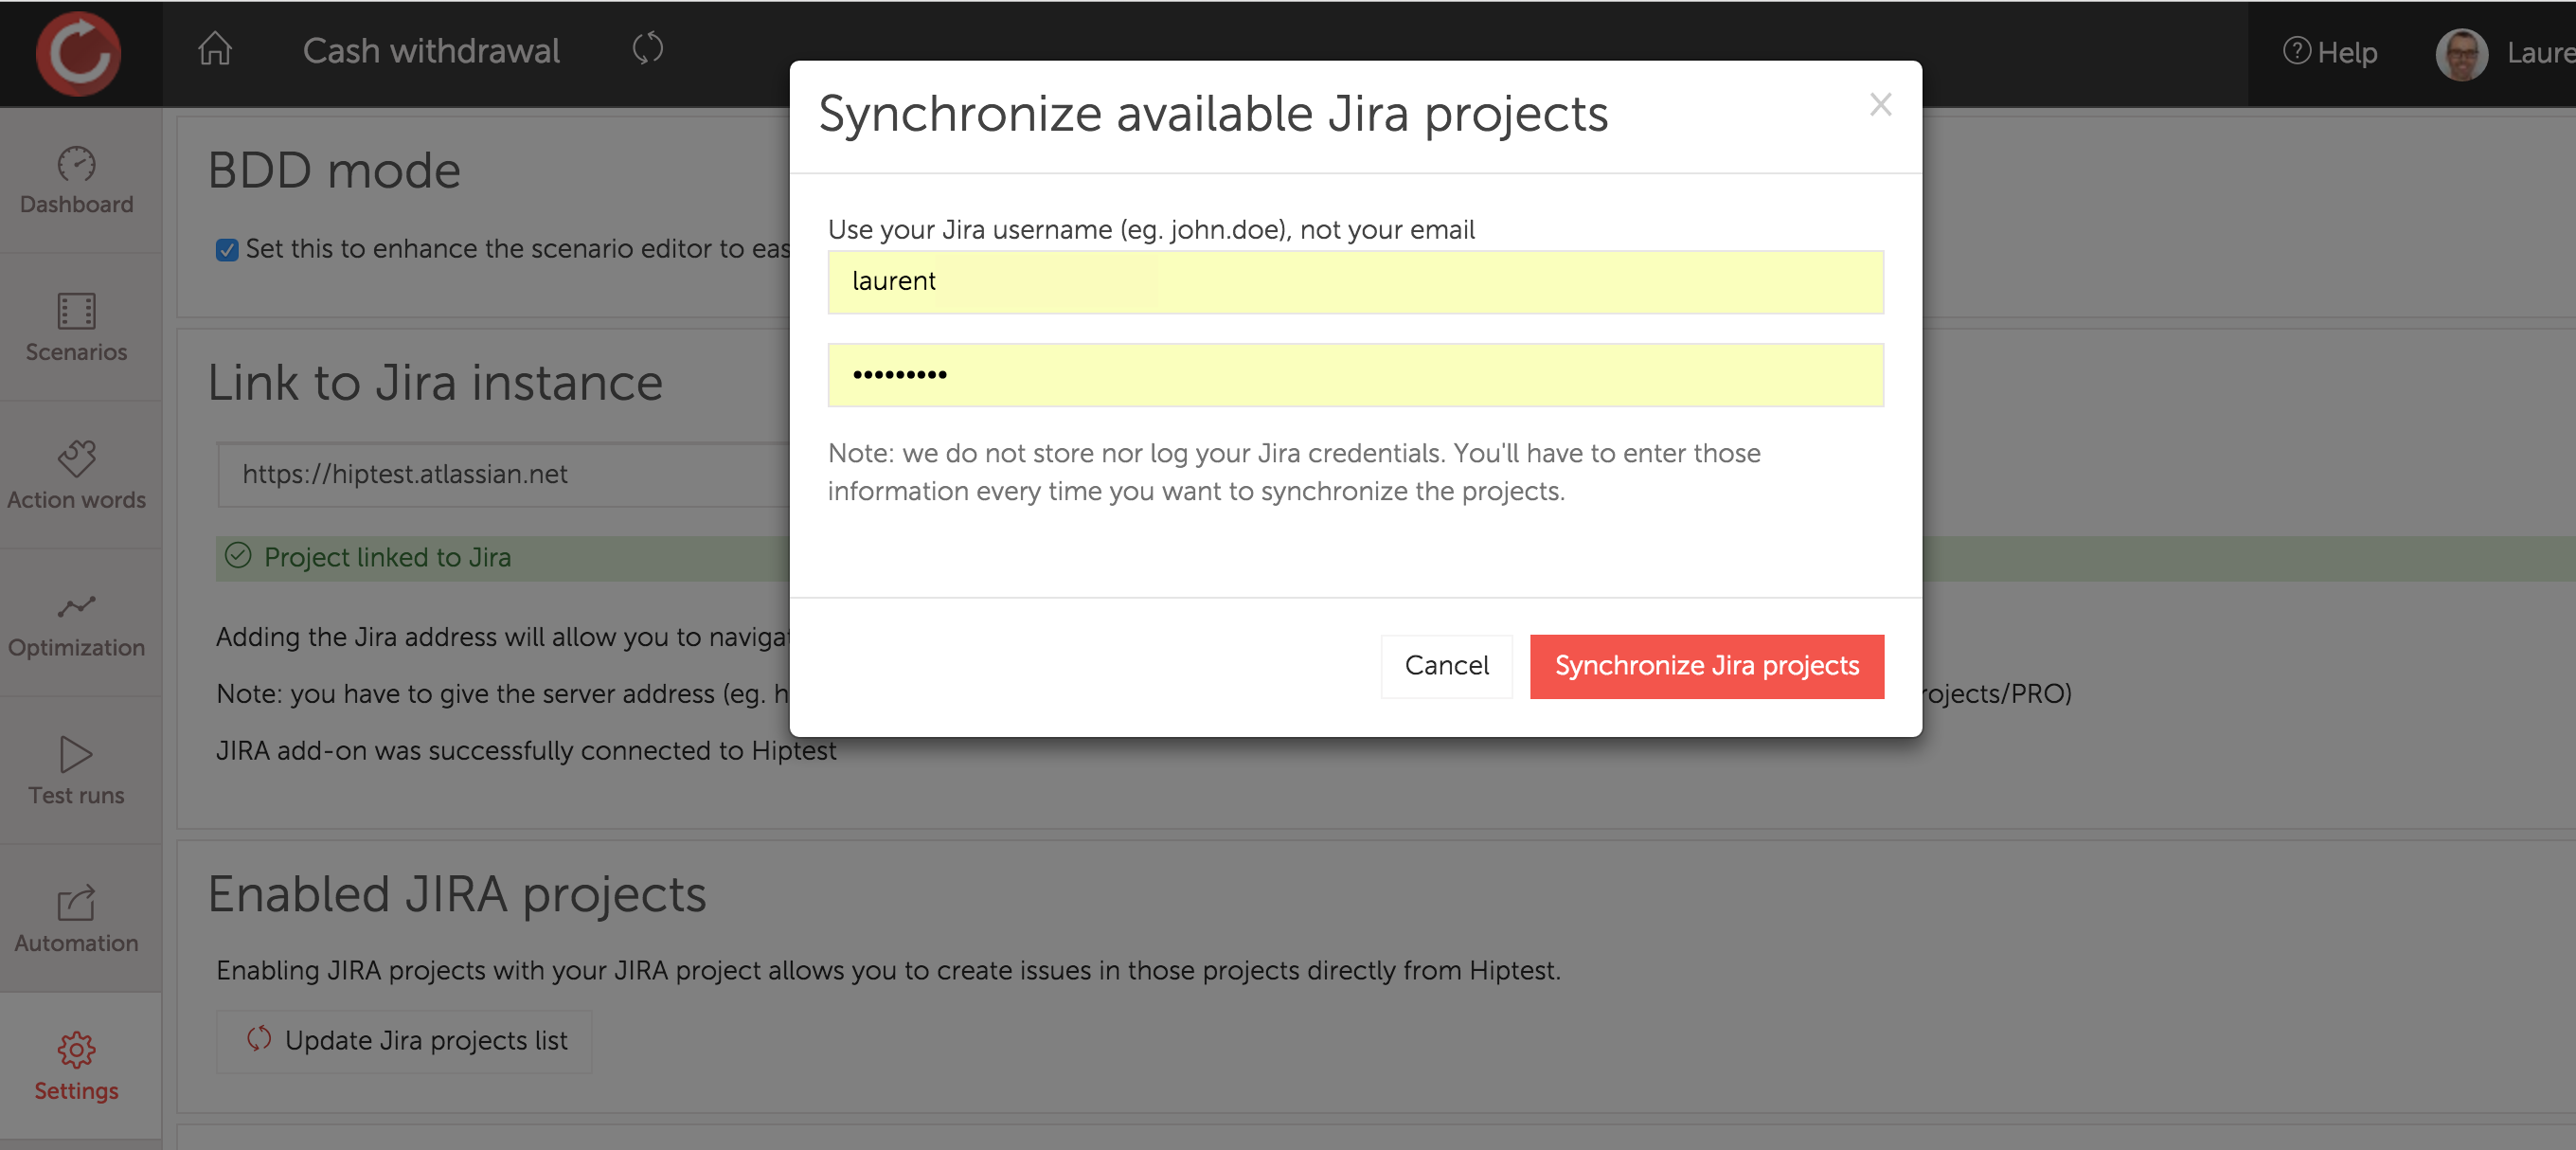 Synchronize available Jira projects